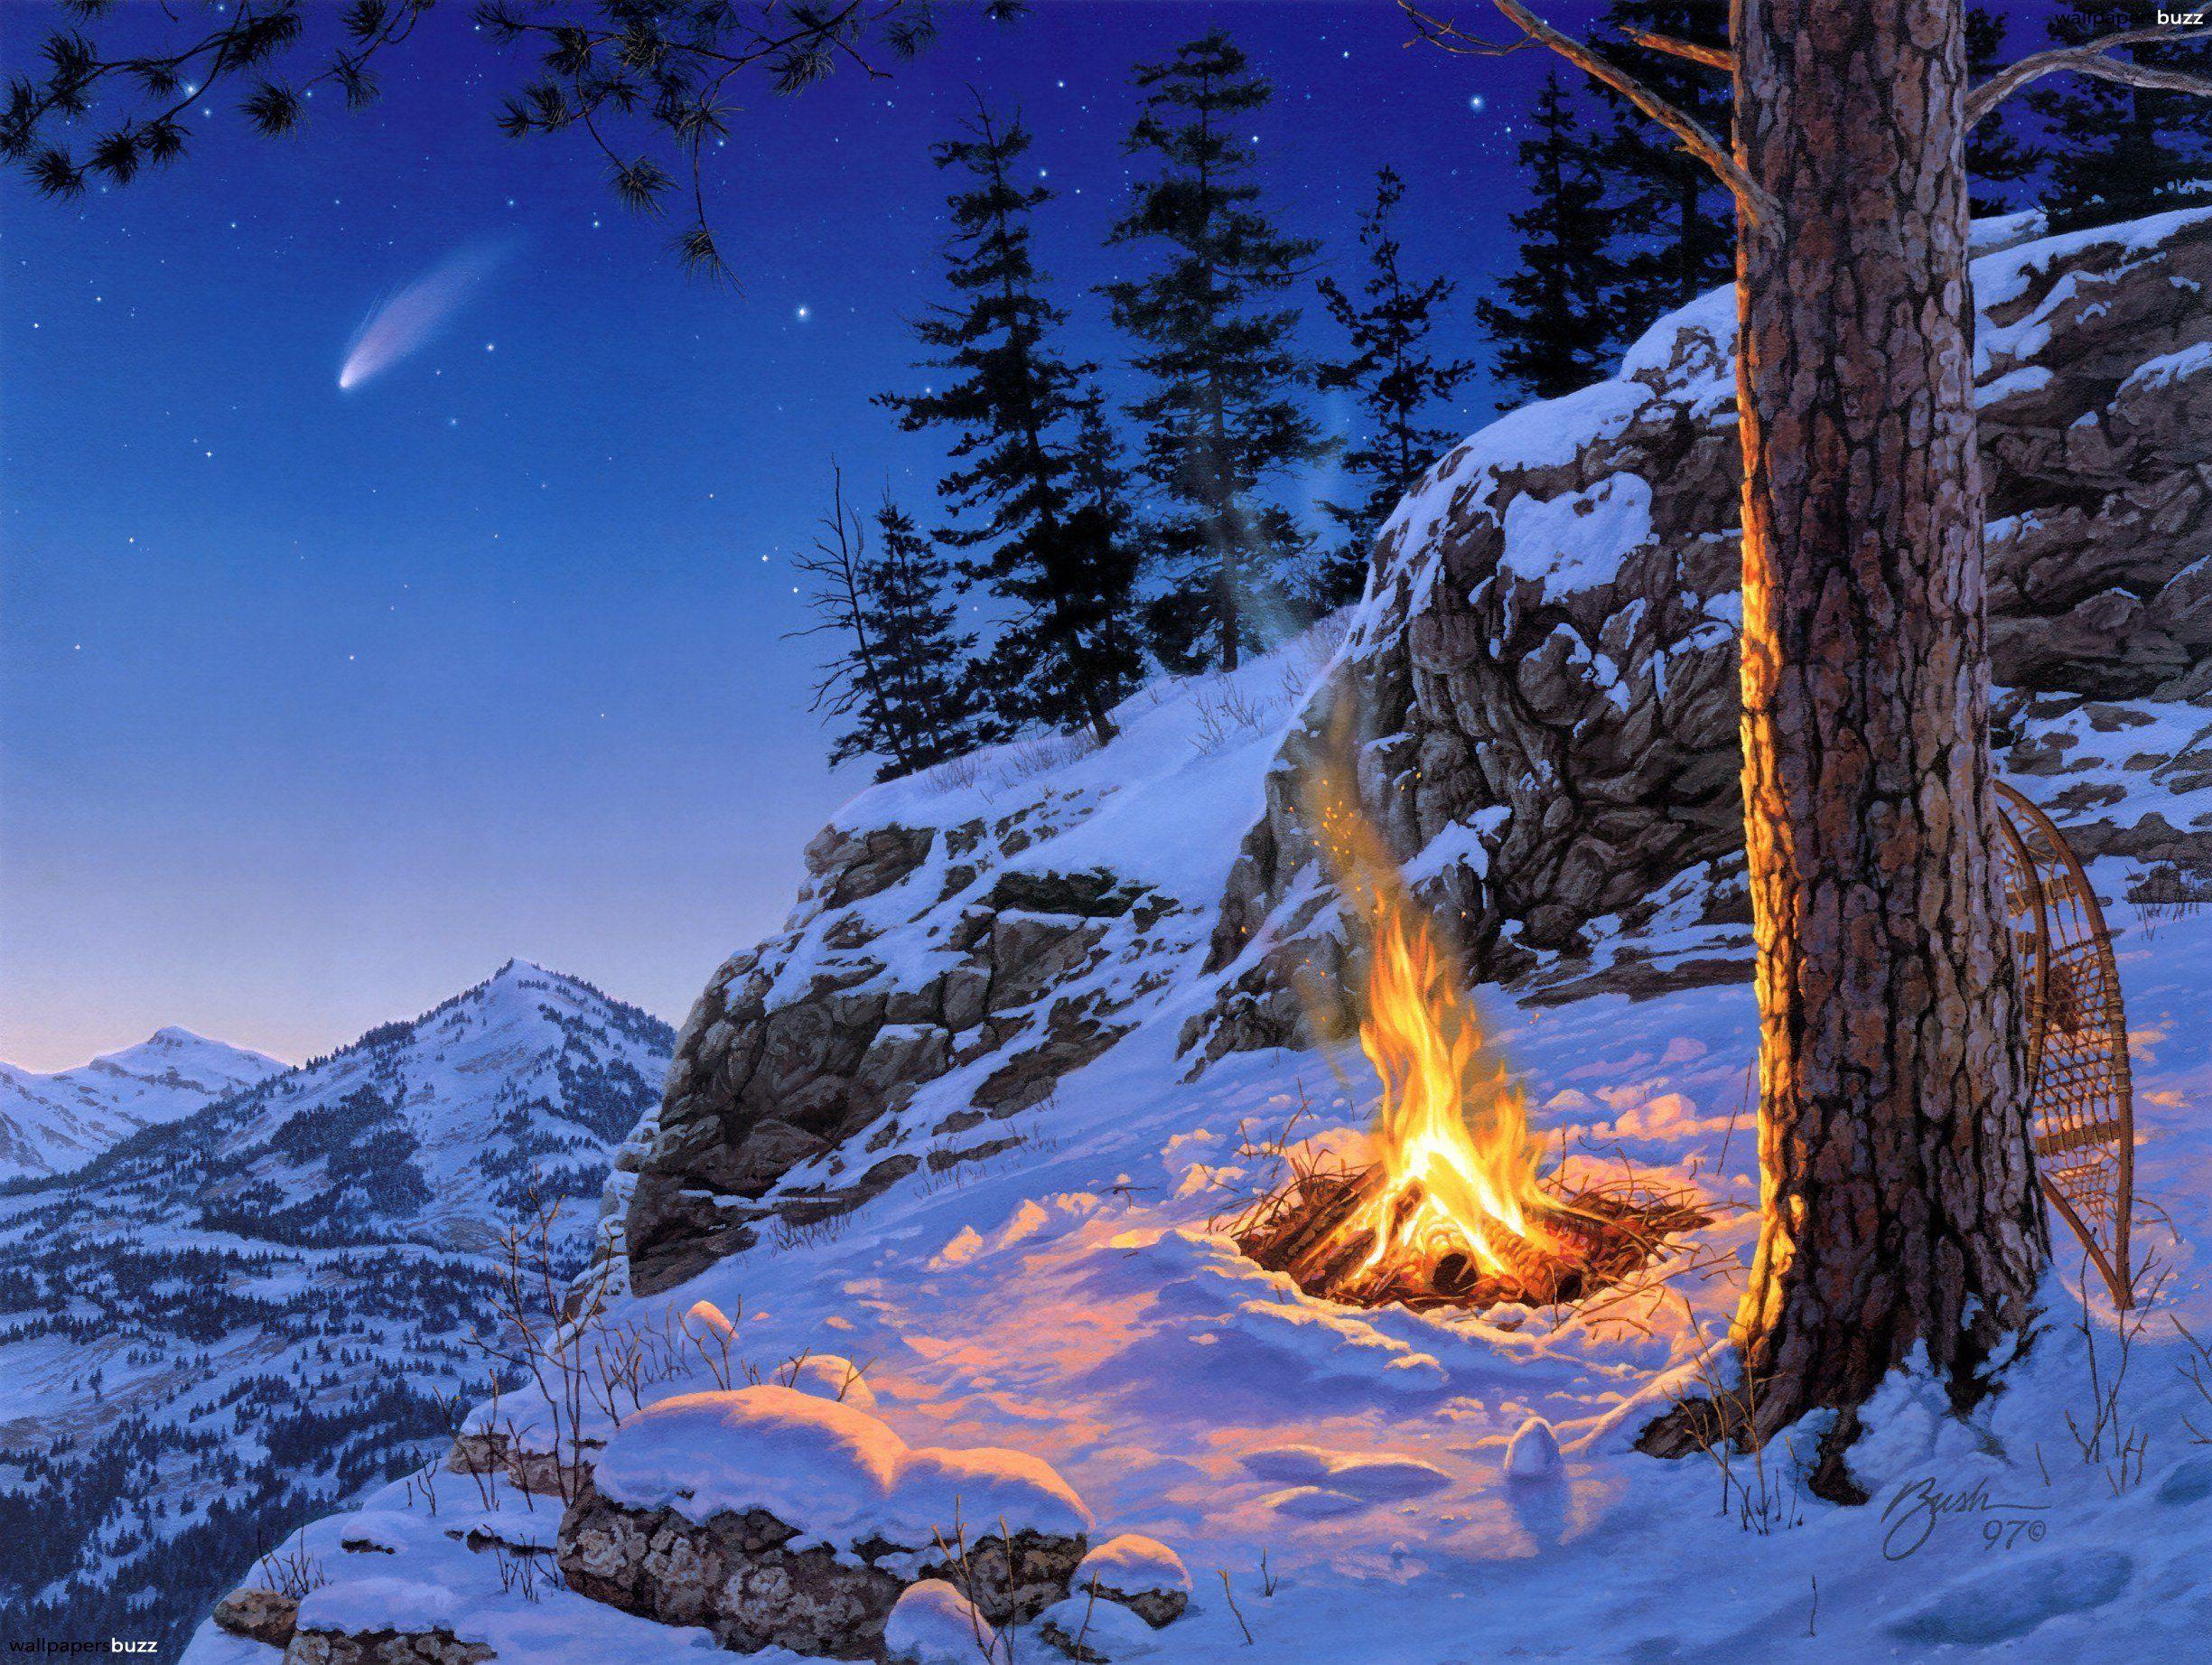 Night in the snowy mountains HD Wallpaper